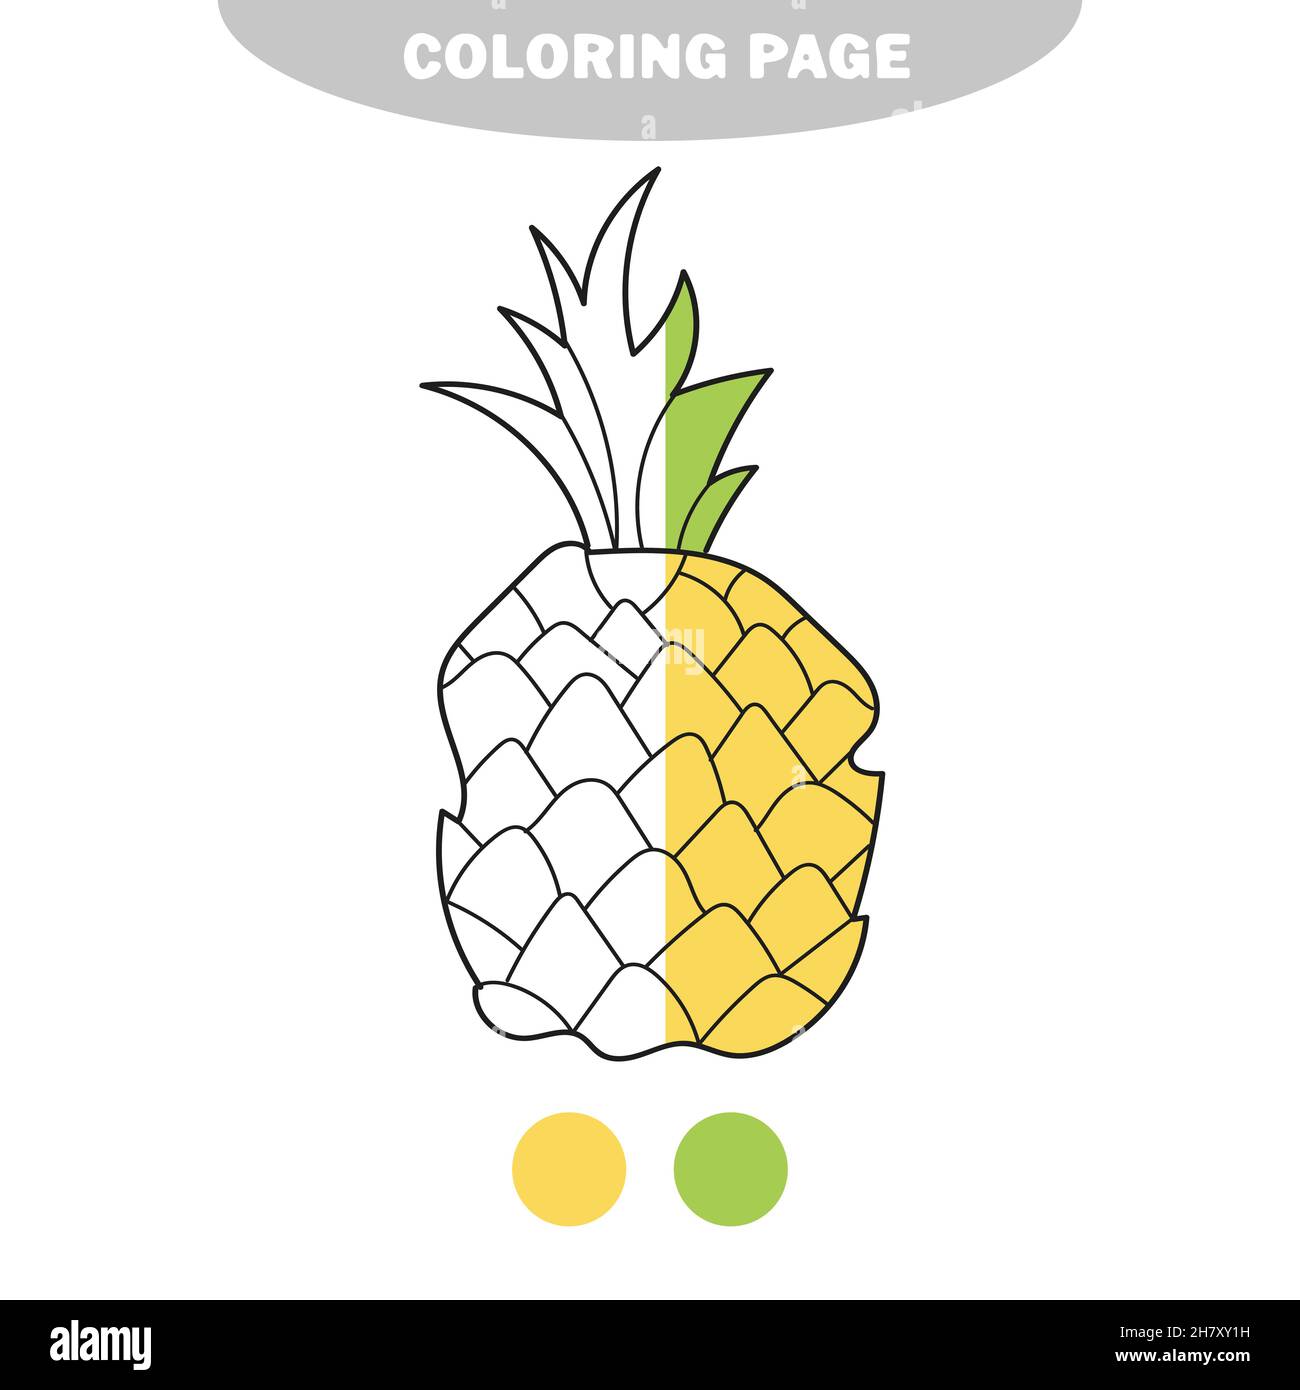 Pineapple coloring sheet black and white vector illustration stock vector image art